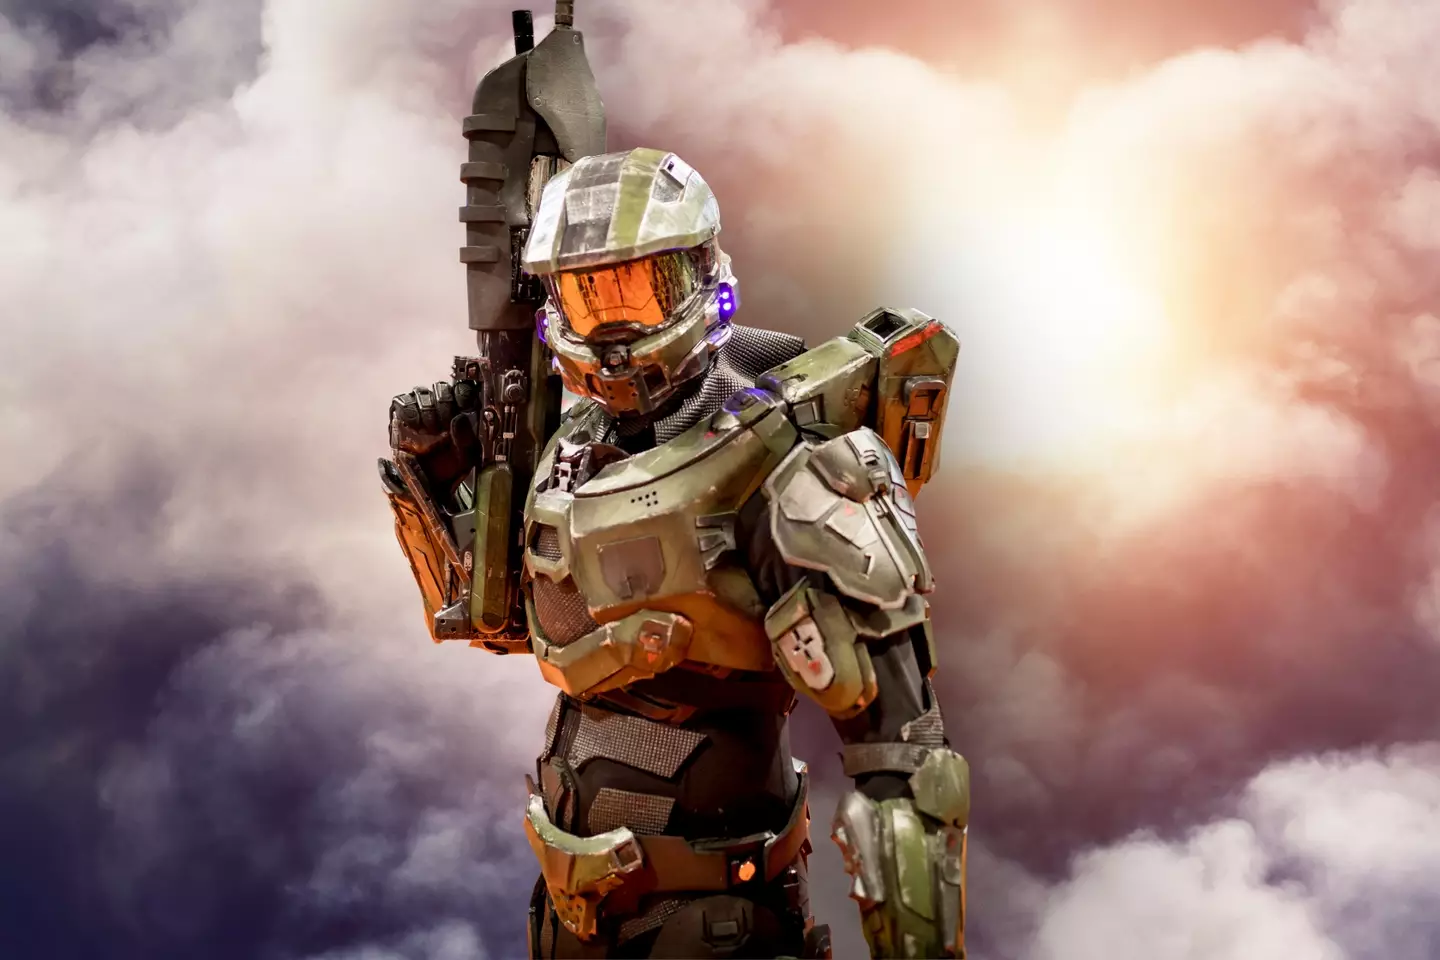 A cosplayer dressed as Master Chief from Halo.